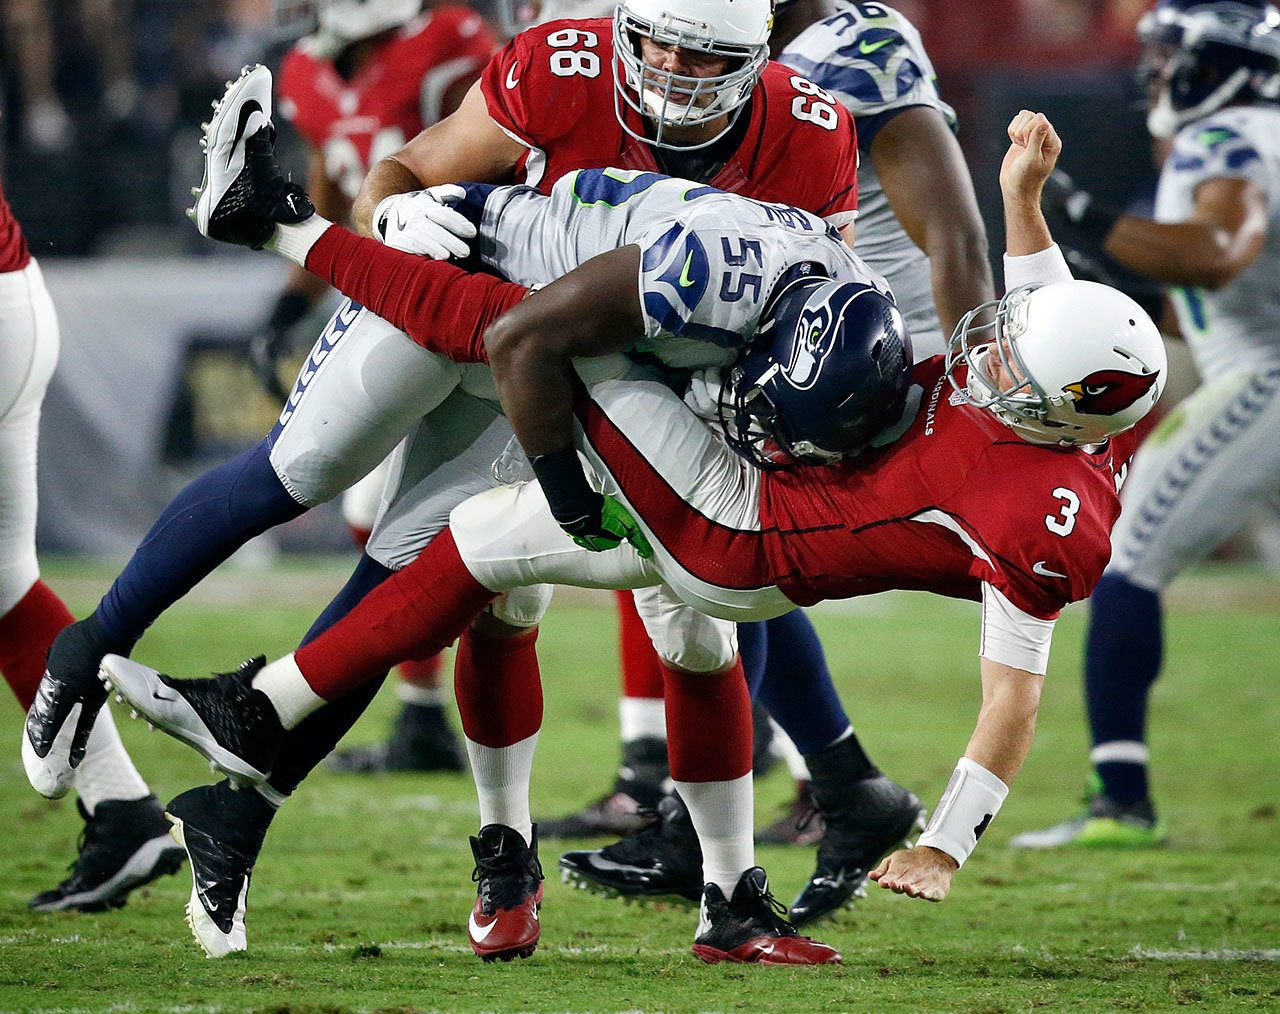 Cardinals quarterback Carson Palmer (3) is hit after the throw by Seahawks defensive end Frank Clark (55) during the first half of a game Oct. 23 in Glendale, Ariz. (AP Photo/Ross D. Franklin)